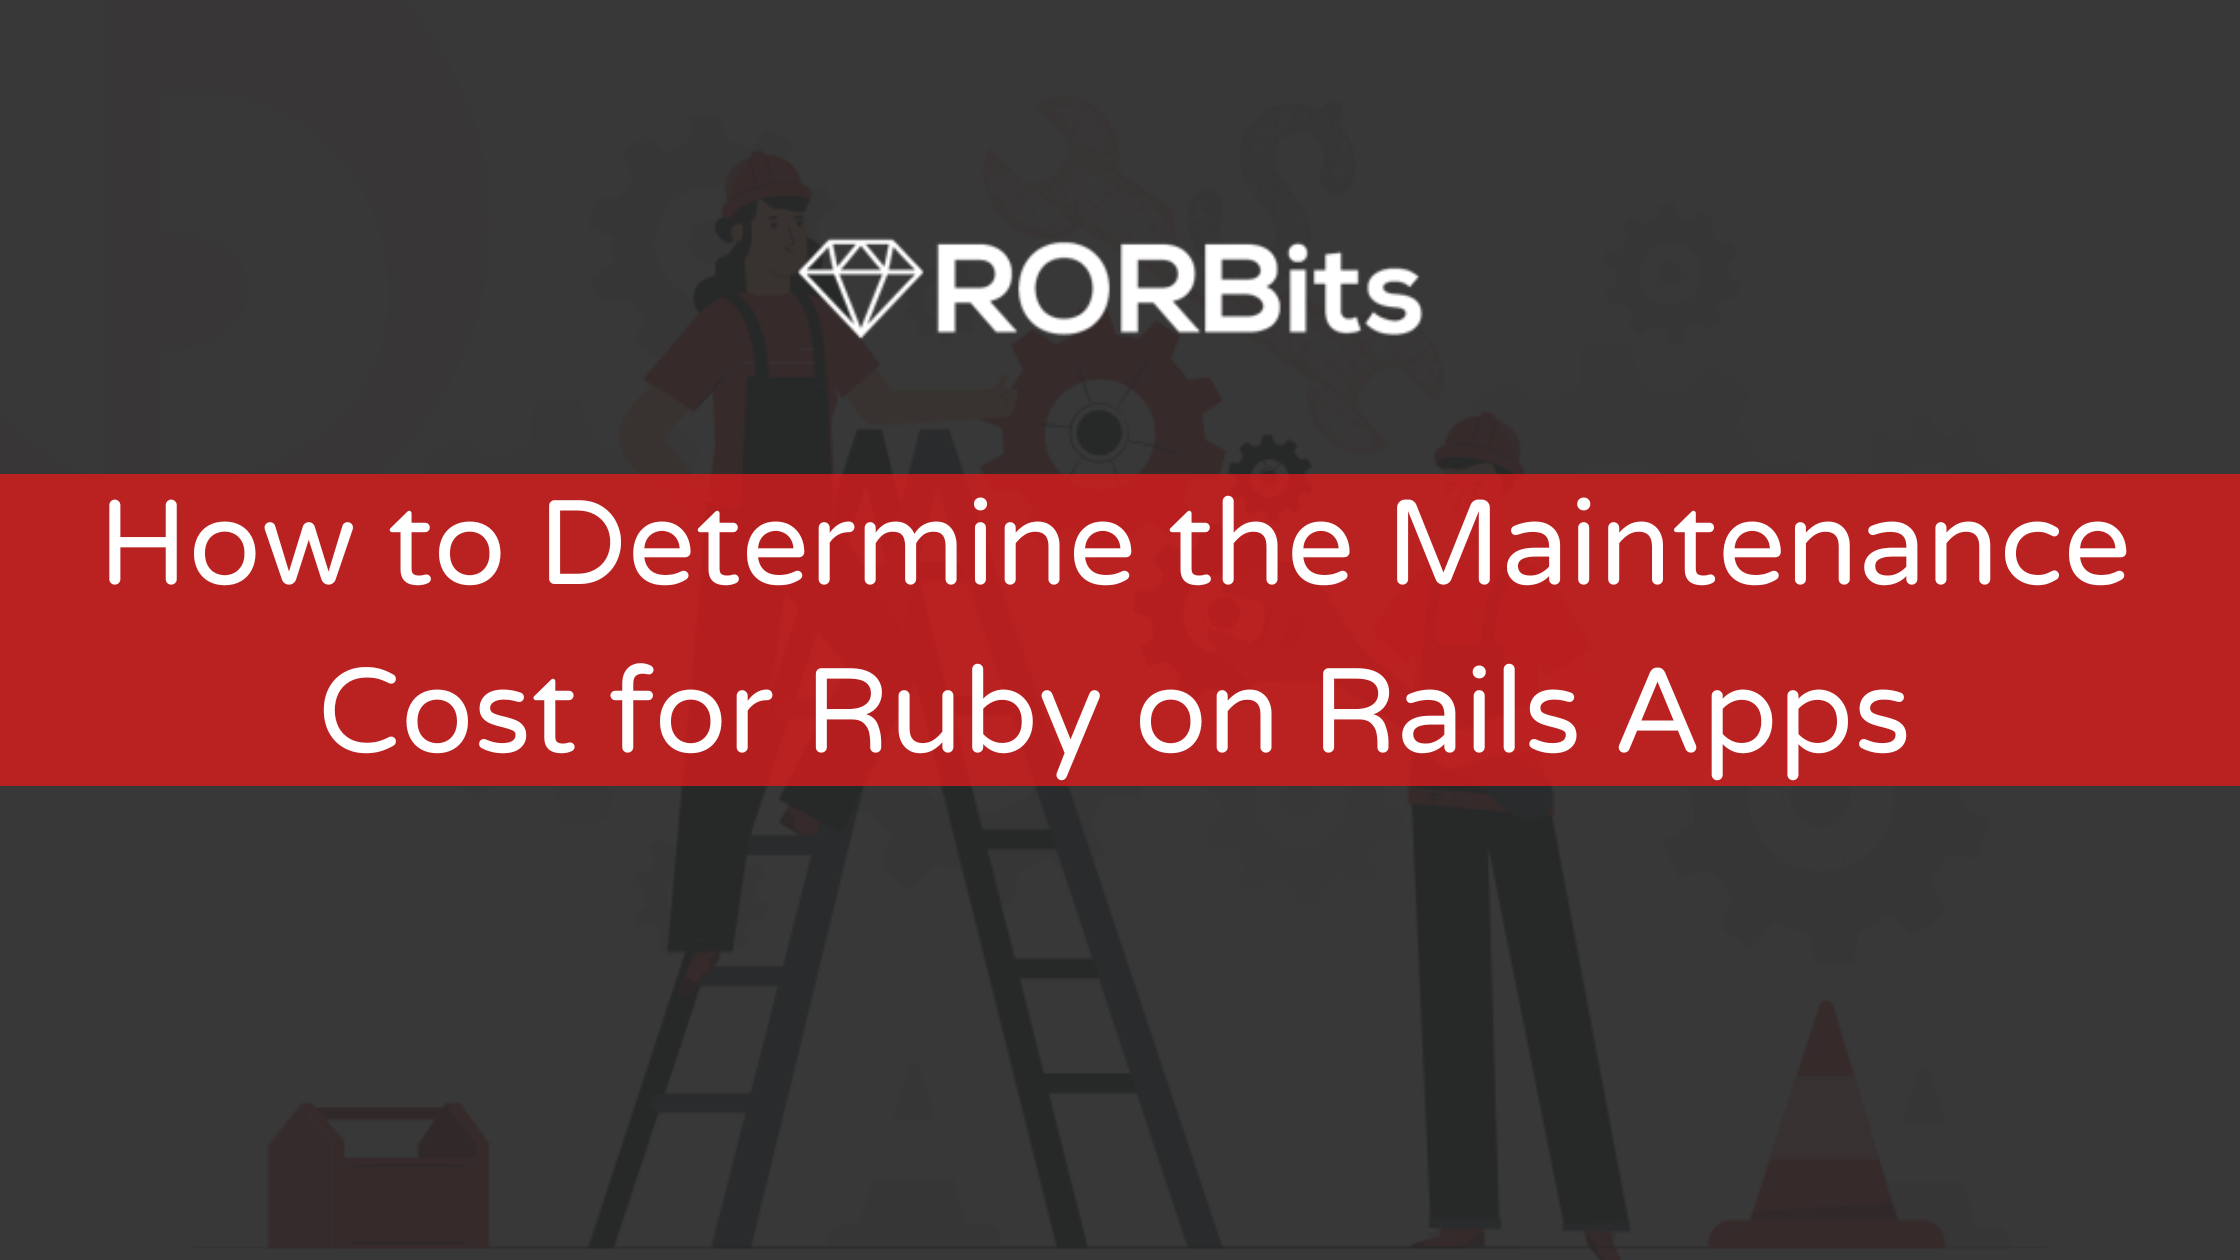 How to Determine the Maintenance Cost for Ruby on Rails Apps